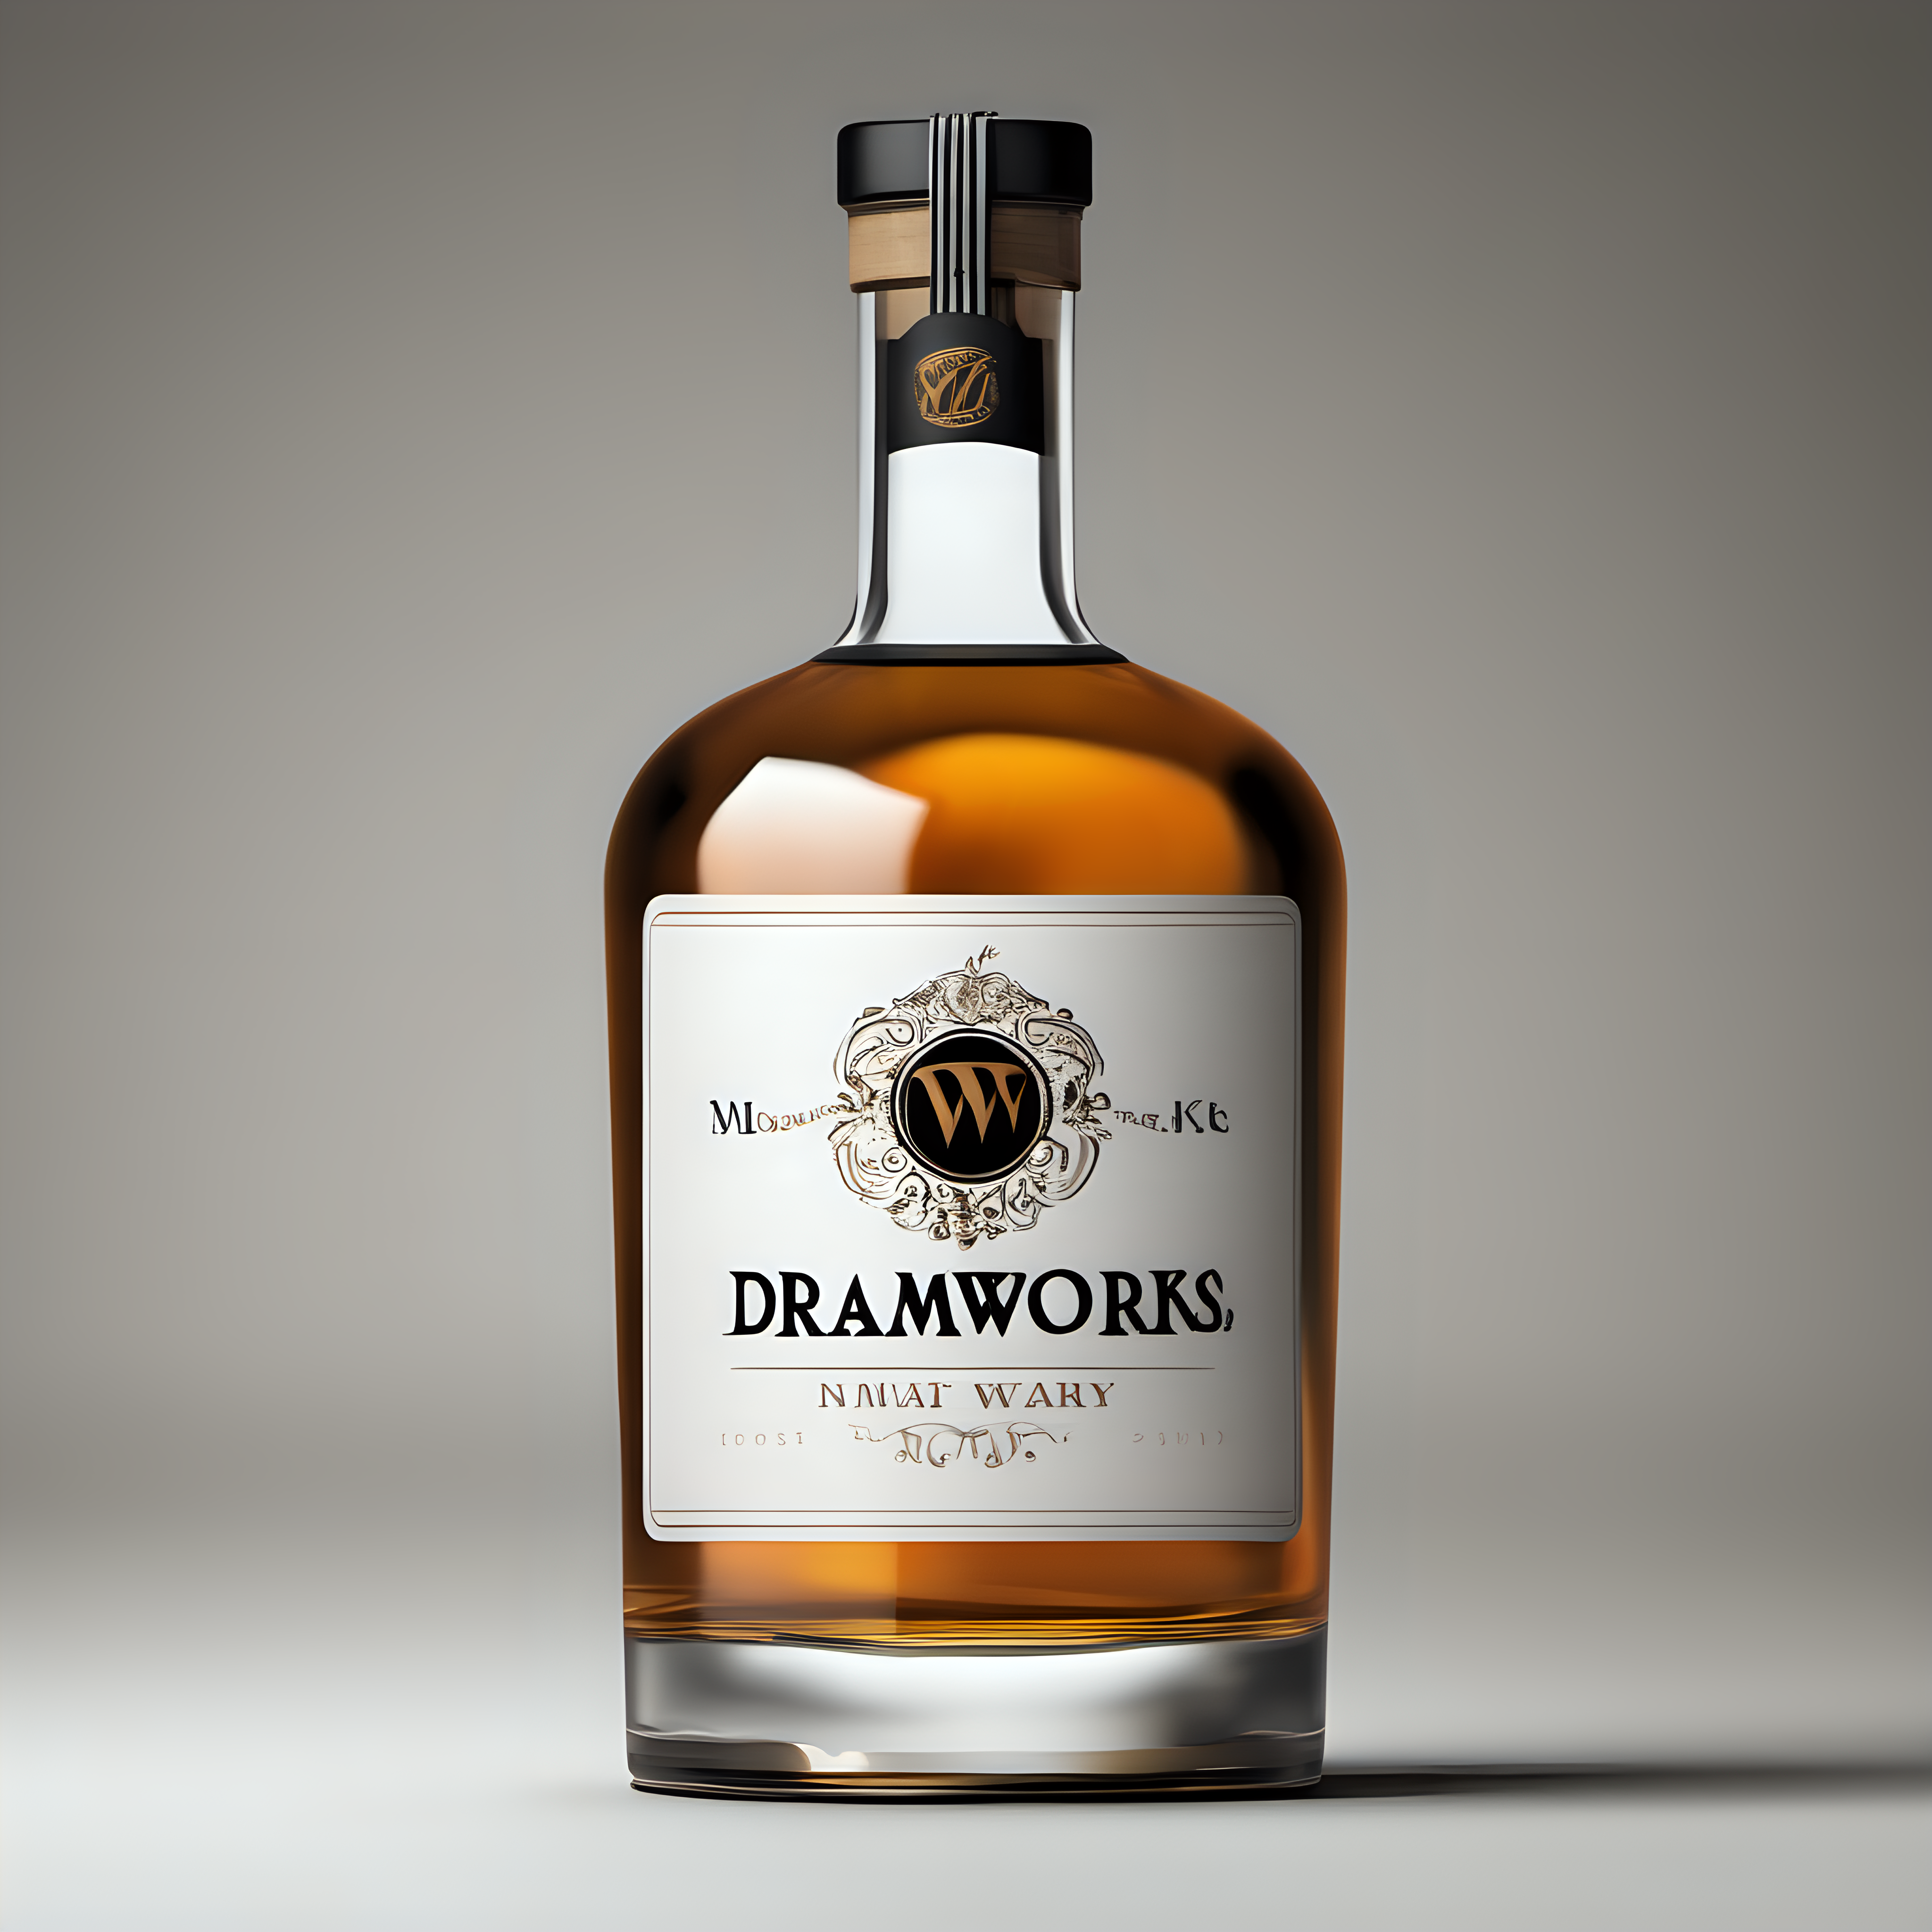 create a brand for a whisky company called